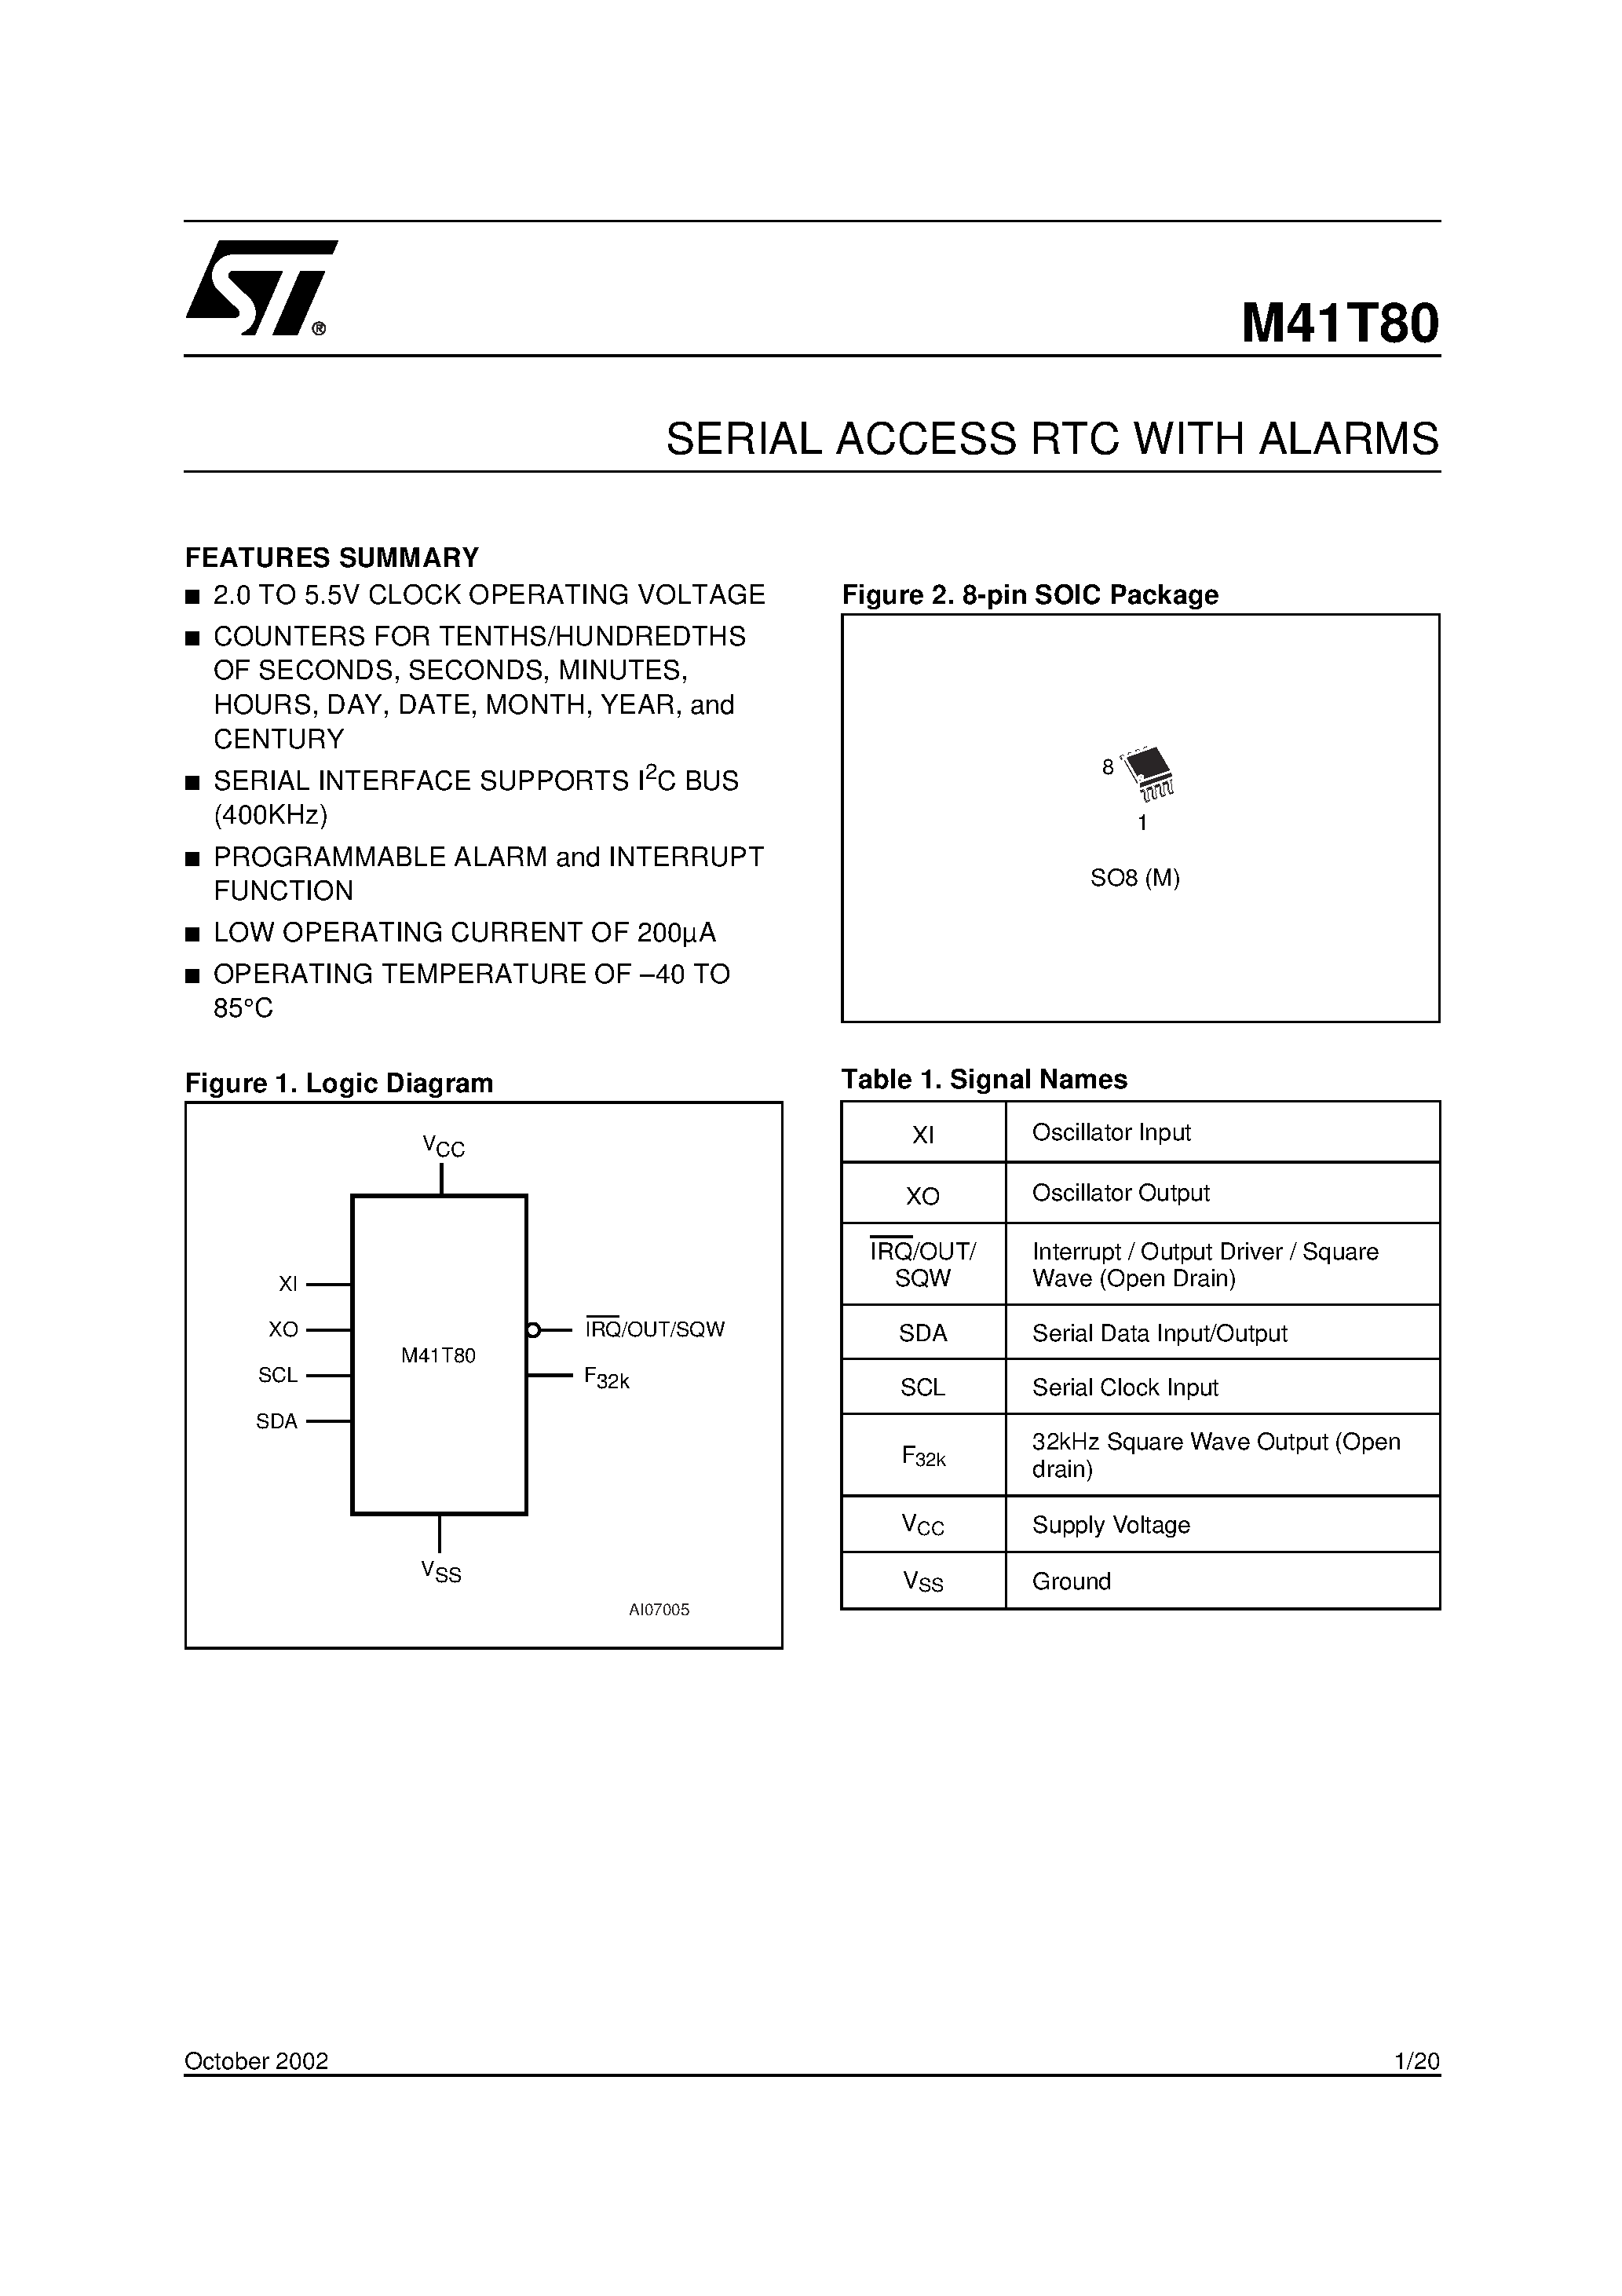 Datasheet M41T80 - SERIAL ACCESS RTC WITH ALARMS page 1